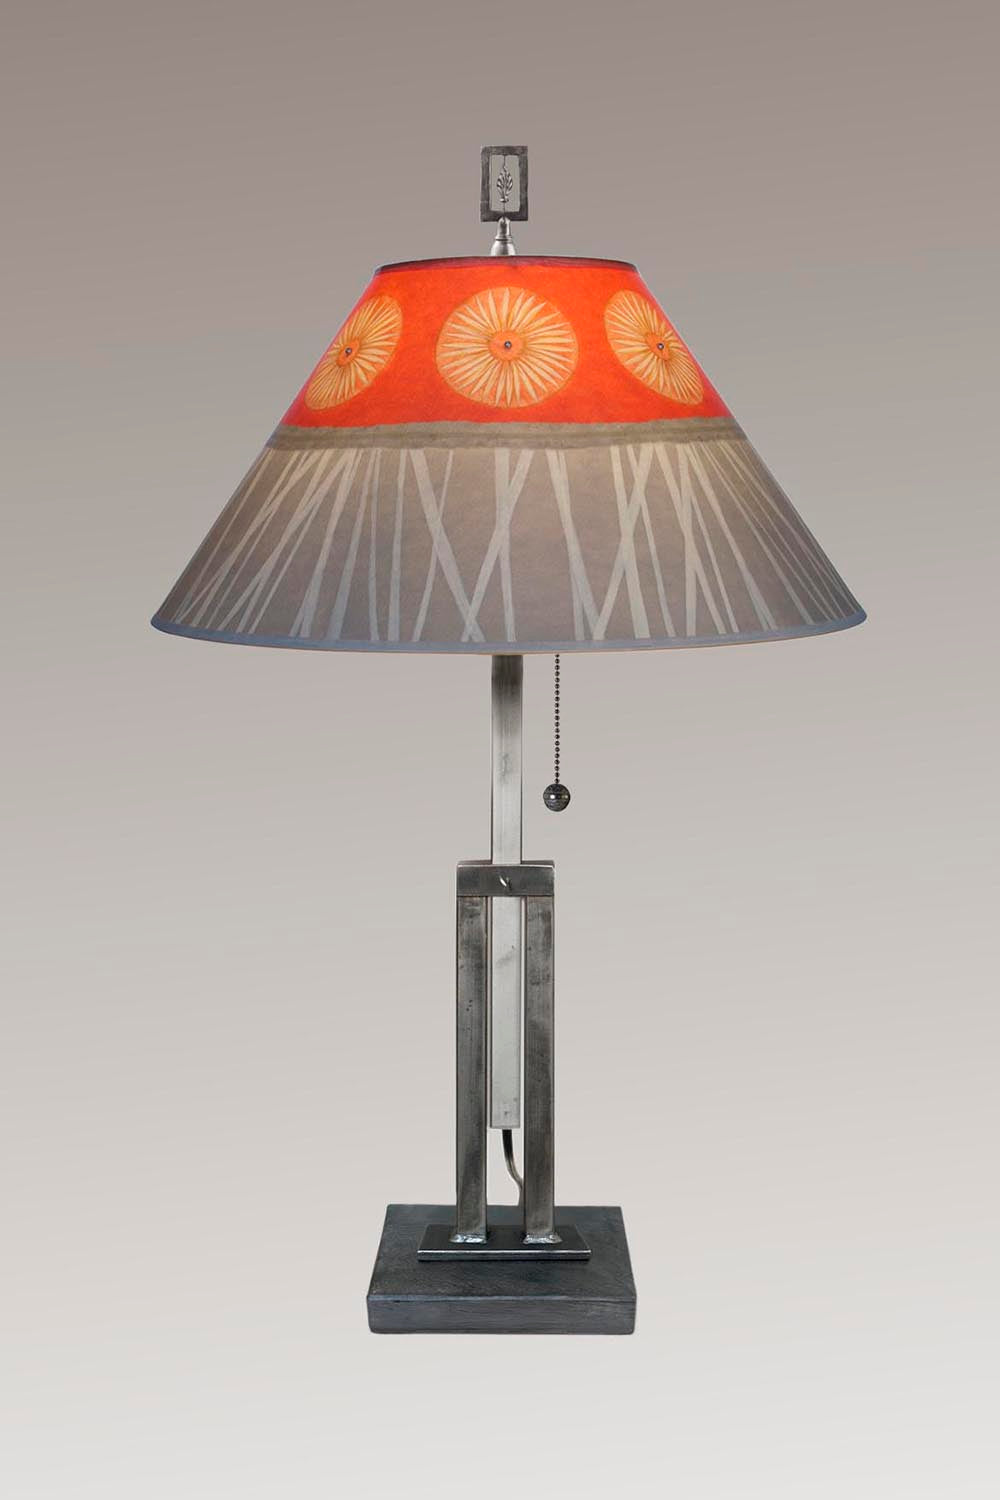 Janna Ugone & Co Table Lamps Adjustable-Height Steel Table Lamp with Large Conical Shade in Tang